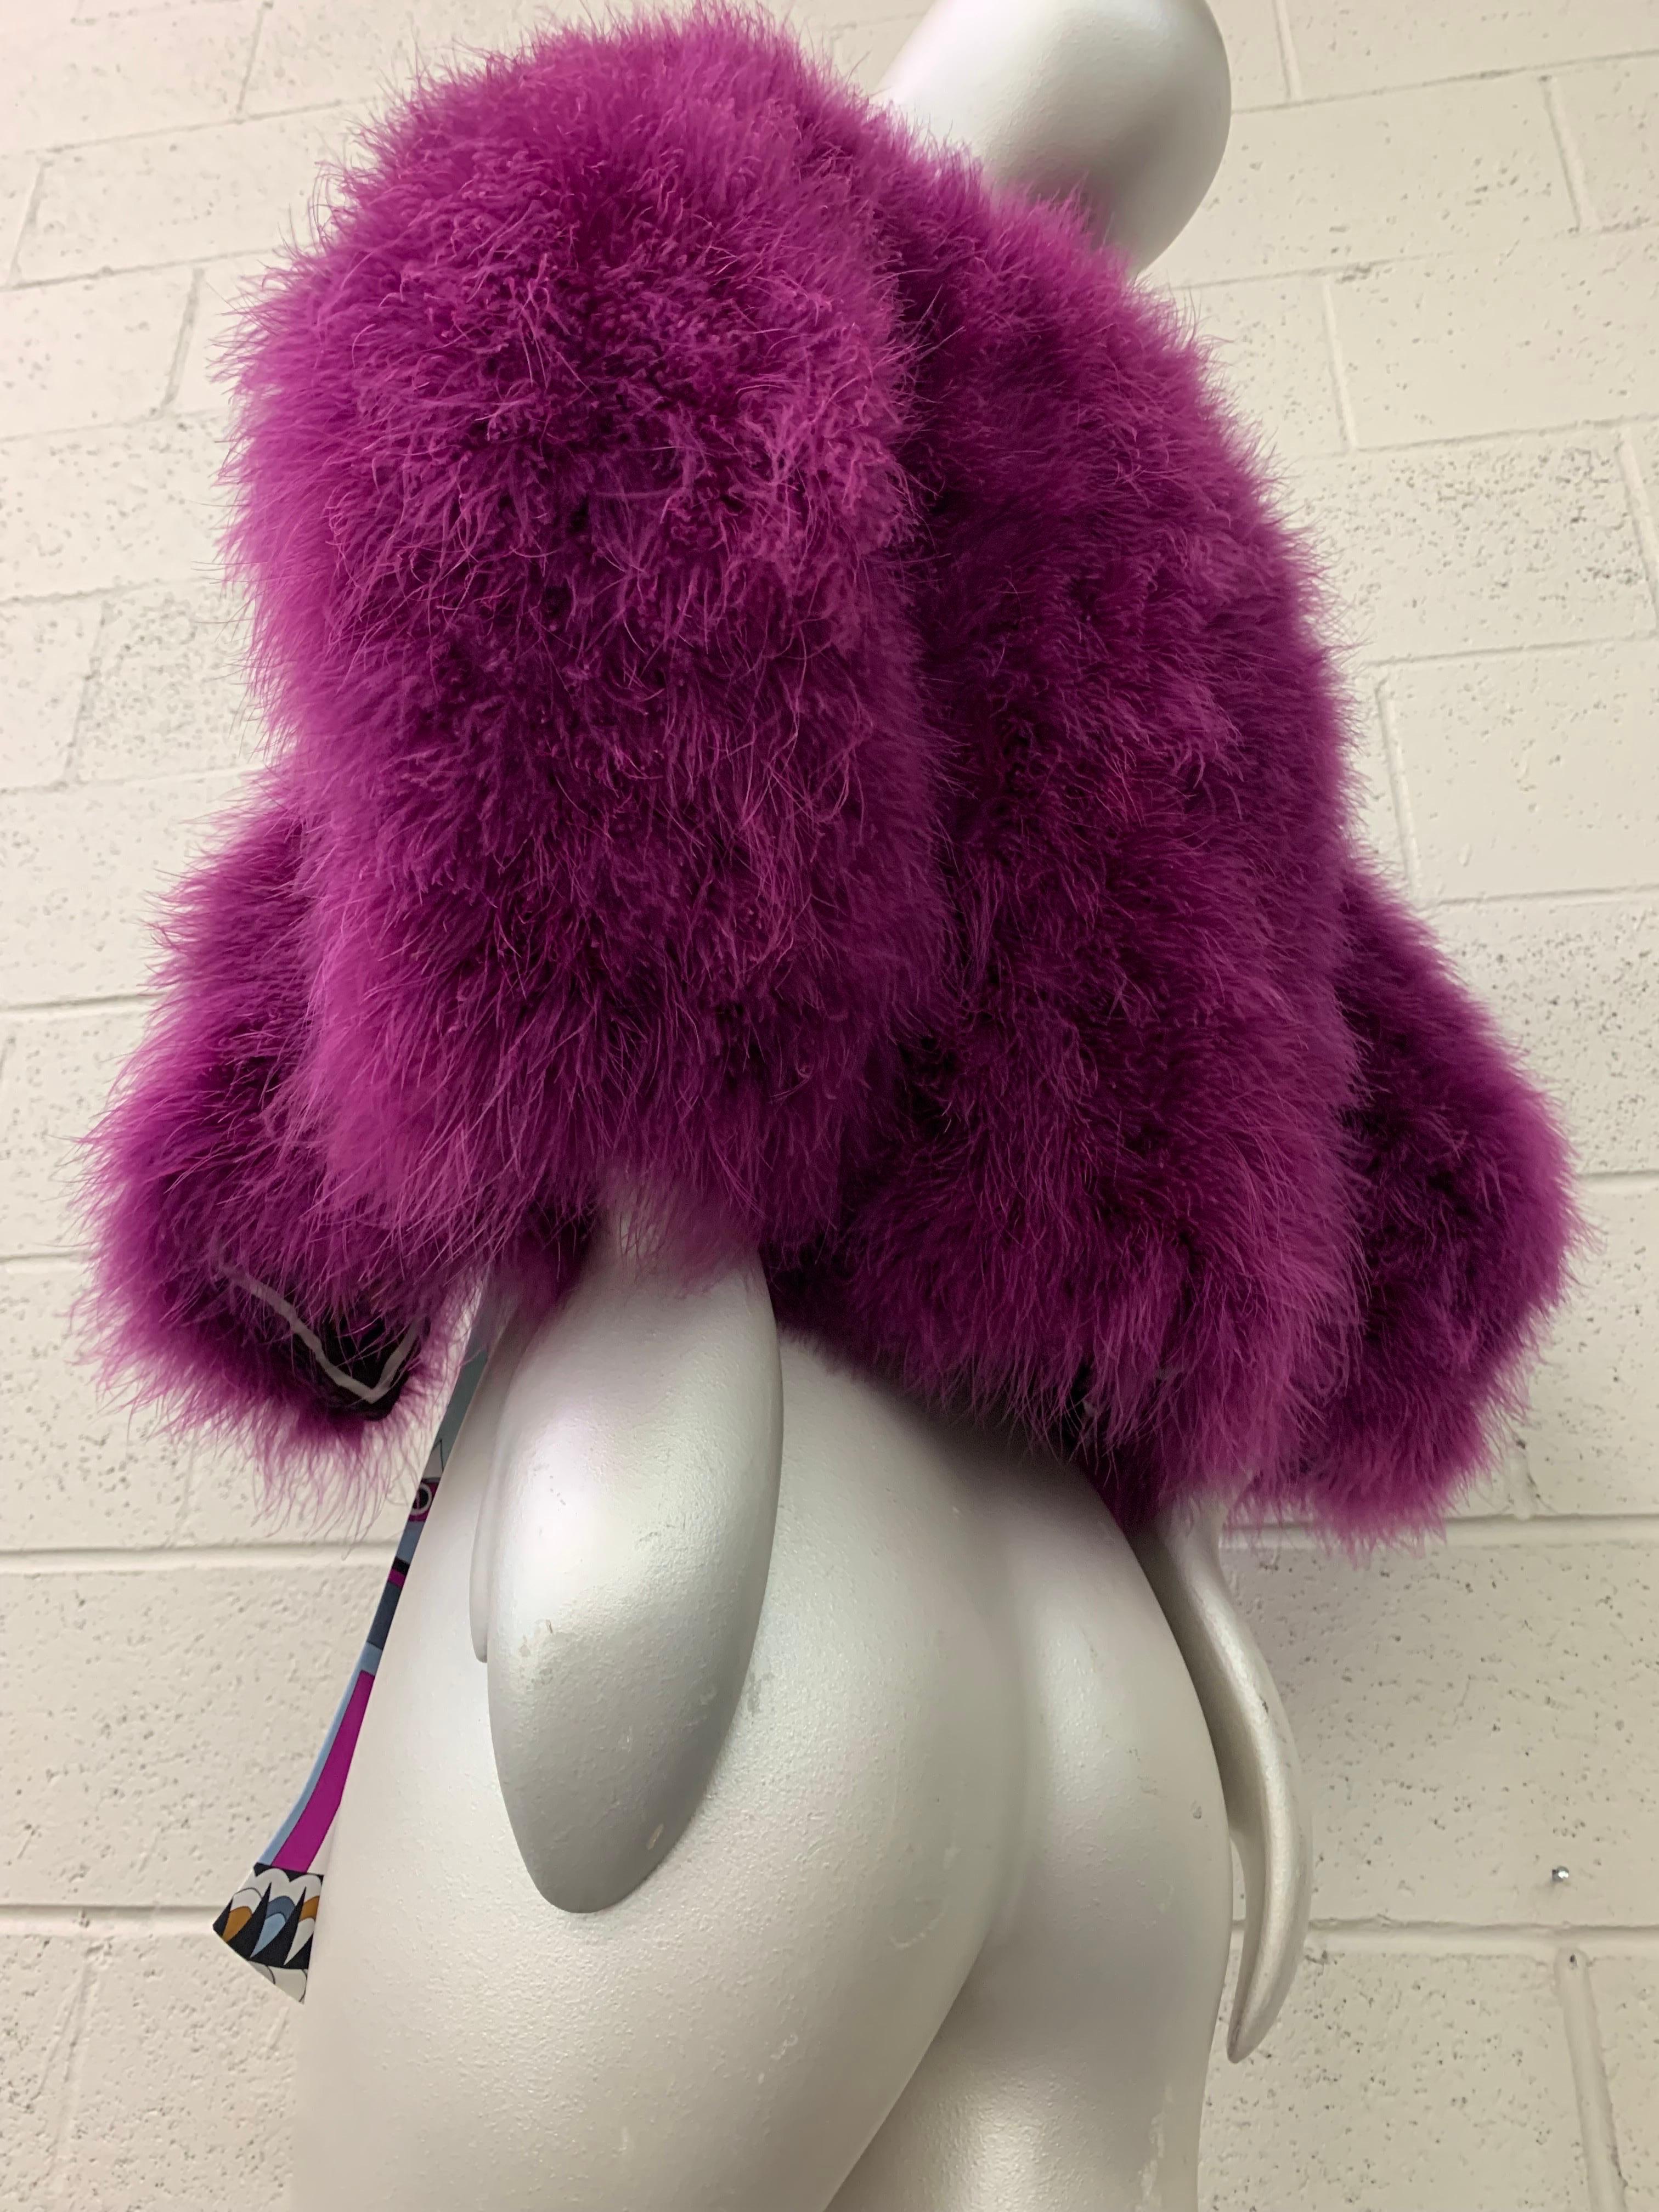 Purple Torso Creations Magenta Marabou Chubby Jacket w Pucci Scarf Tie at Neckline For Sale